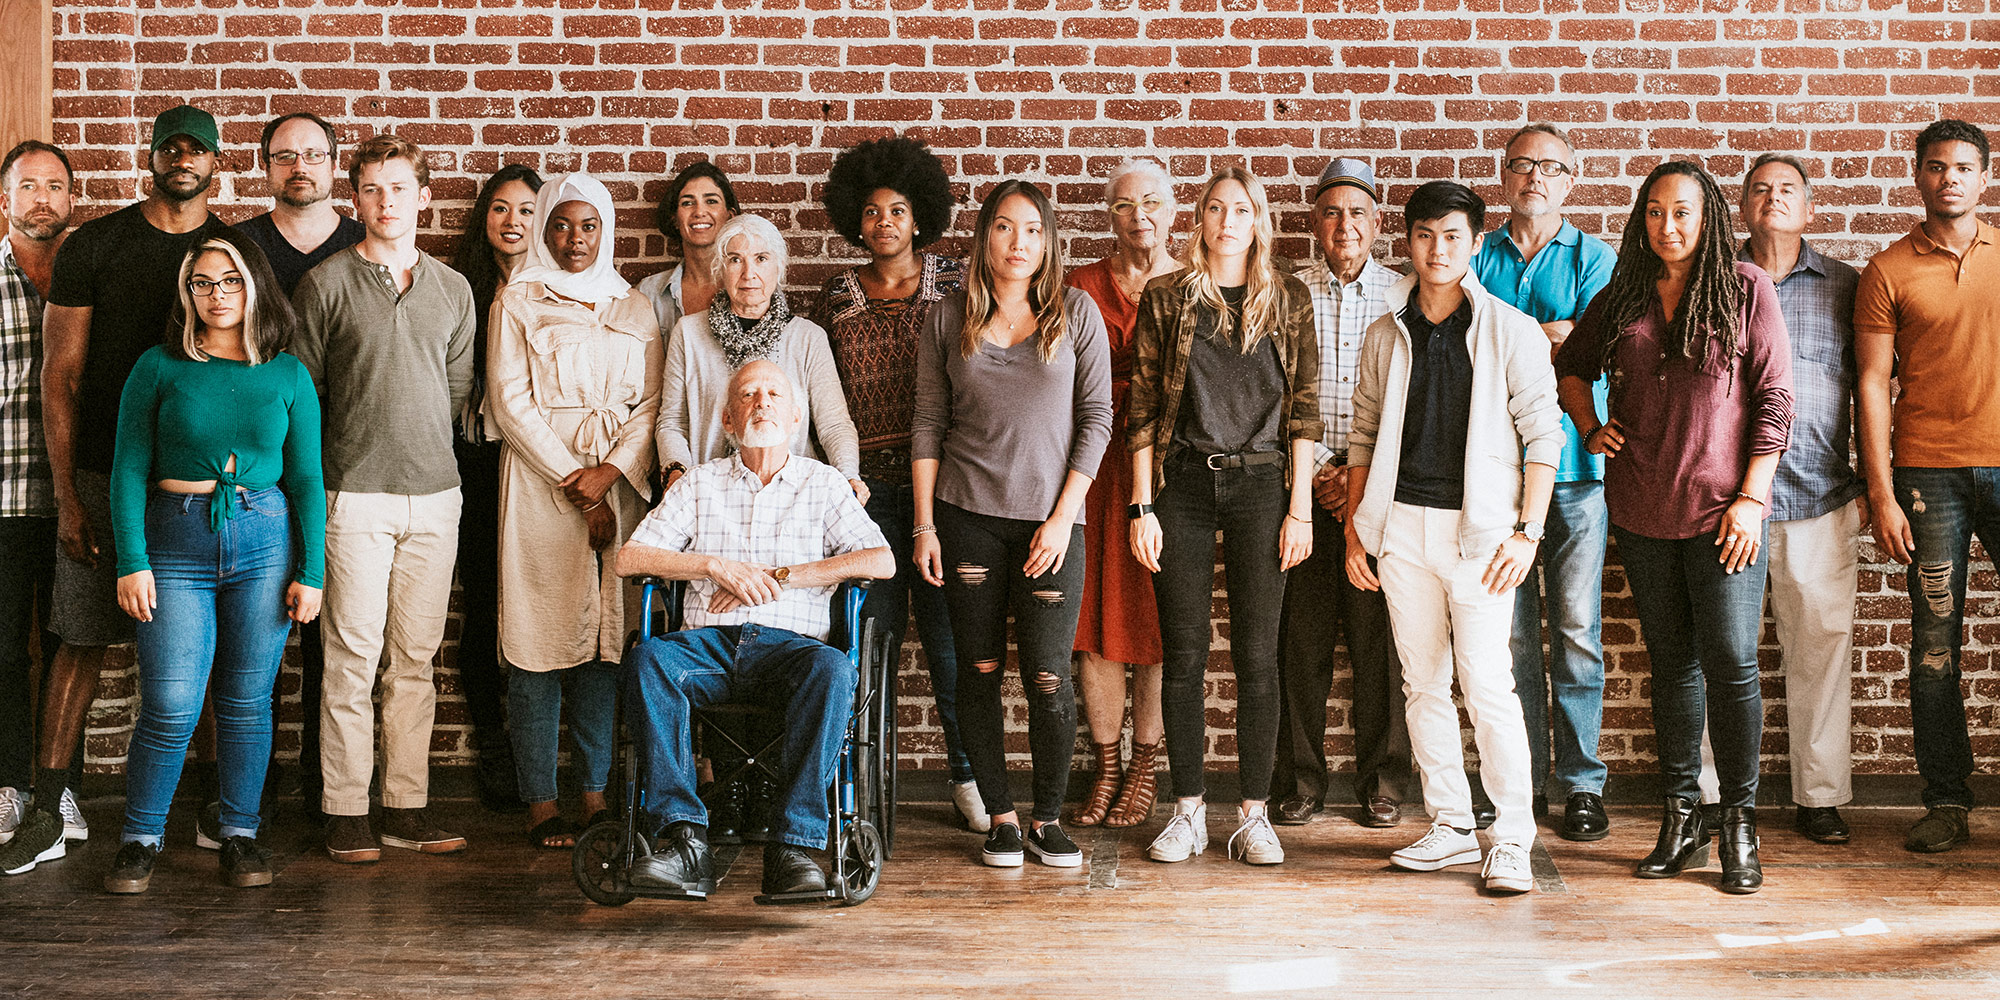 group of people of various ages, ethnicities and abilities standing/sitting in front of a red brick wall